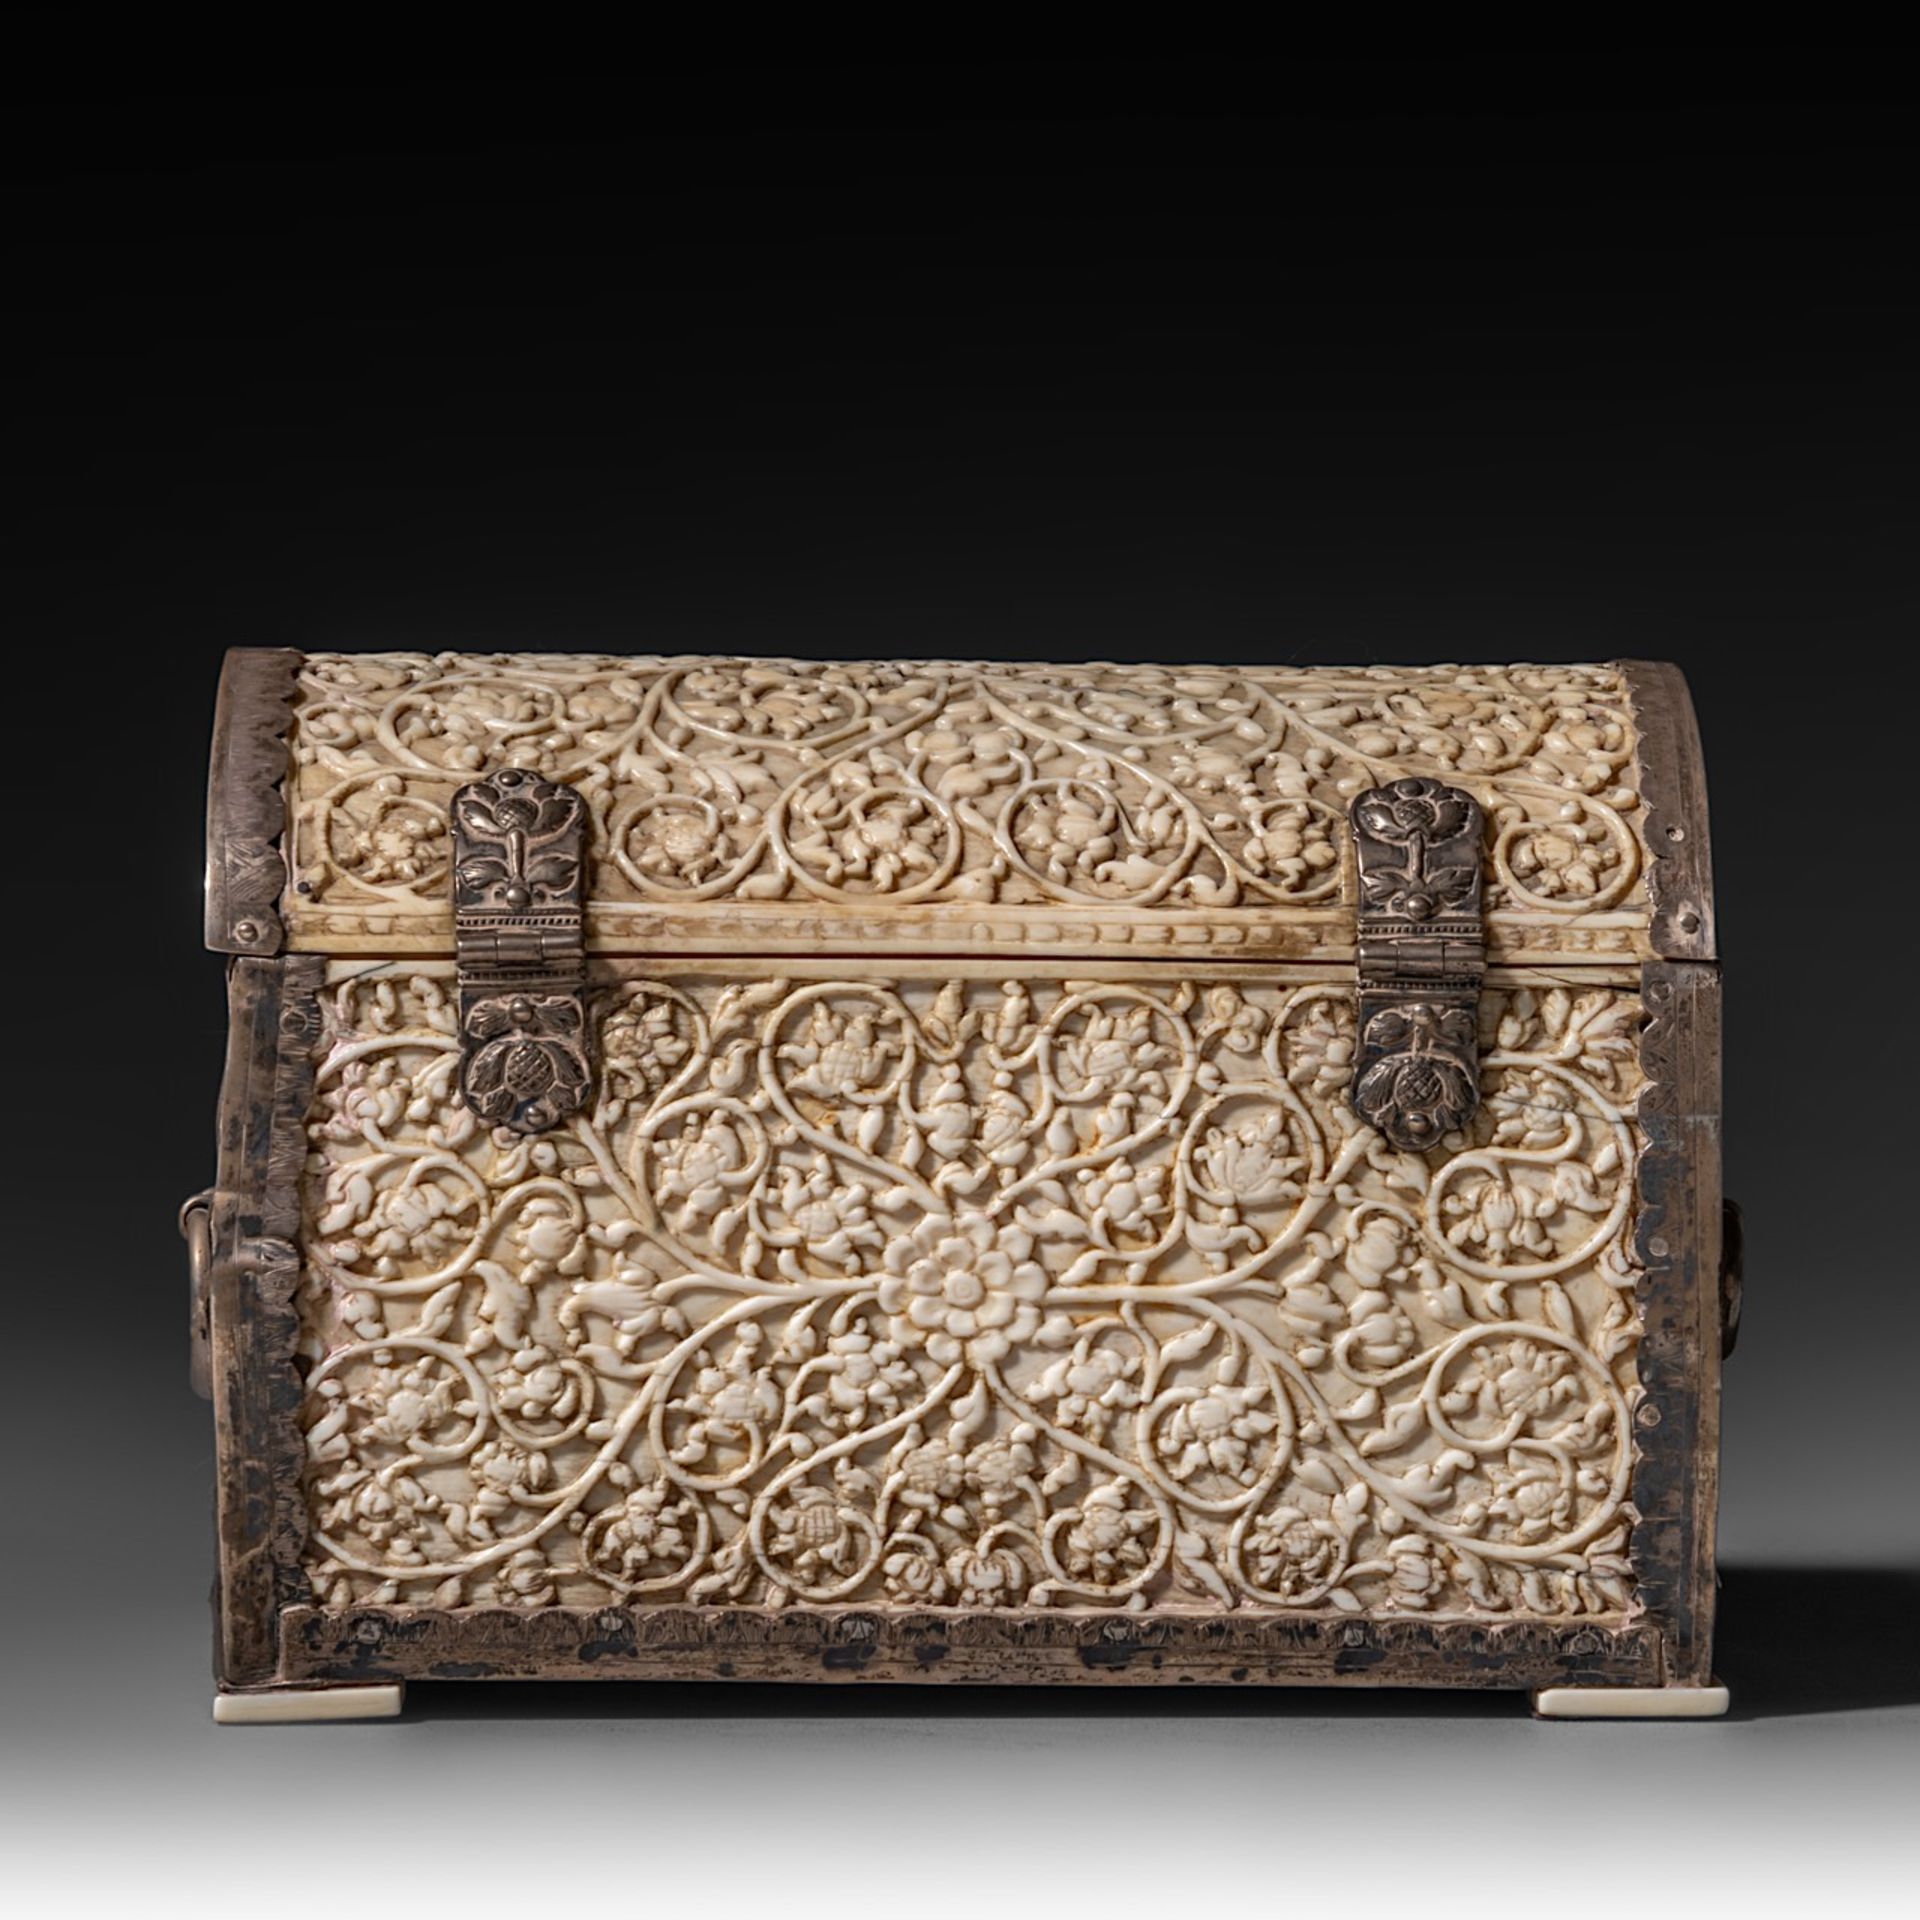 A 17th/18th-century Sinhalese (Sri Lanka) ivory jewelry casket, H 13,5 - W 19,3 - D 10,1 cm / total - Image 5 of 11